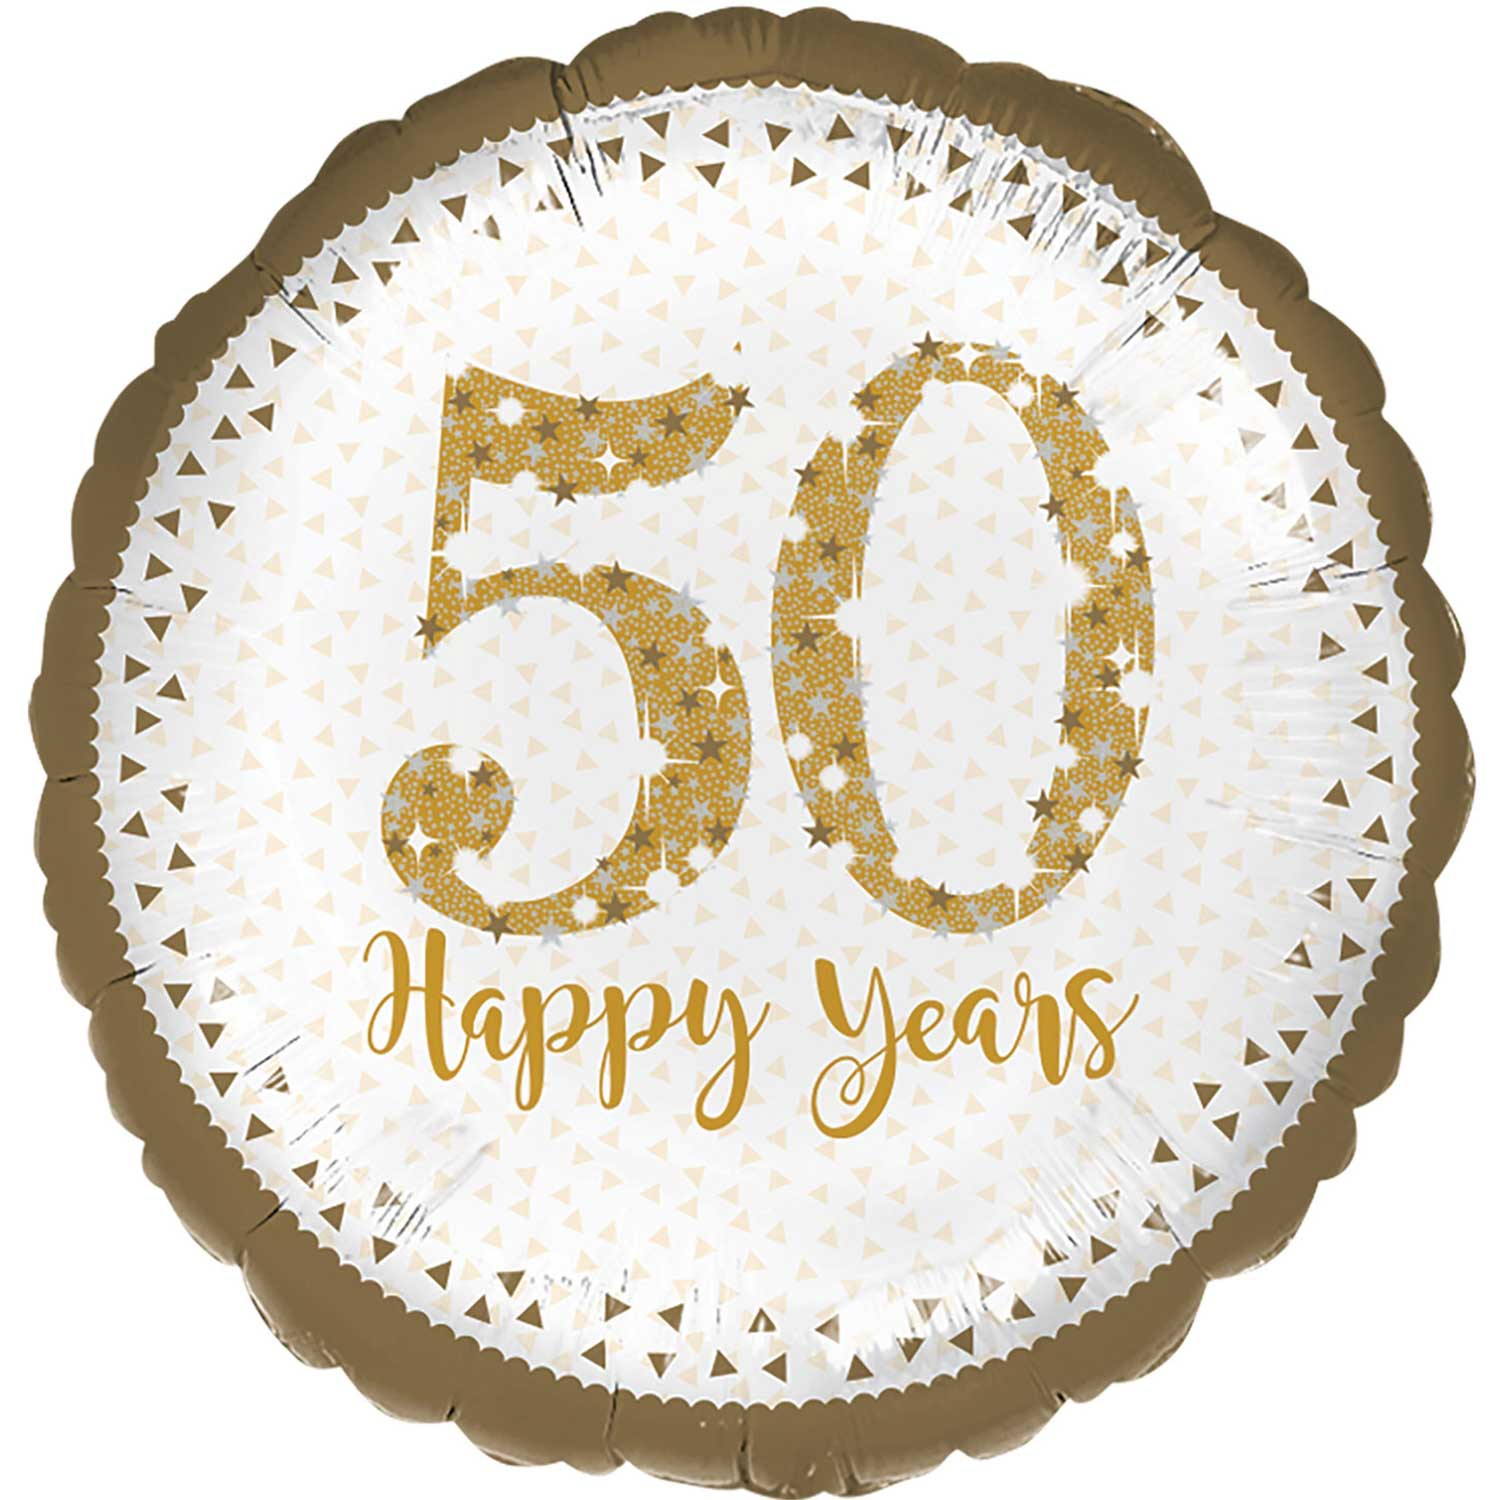 amscan Sparkling Golden Anniversary Cake Decorations /& Candles